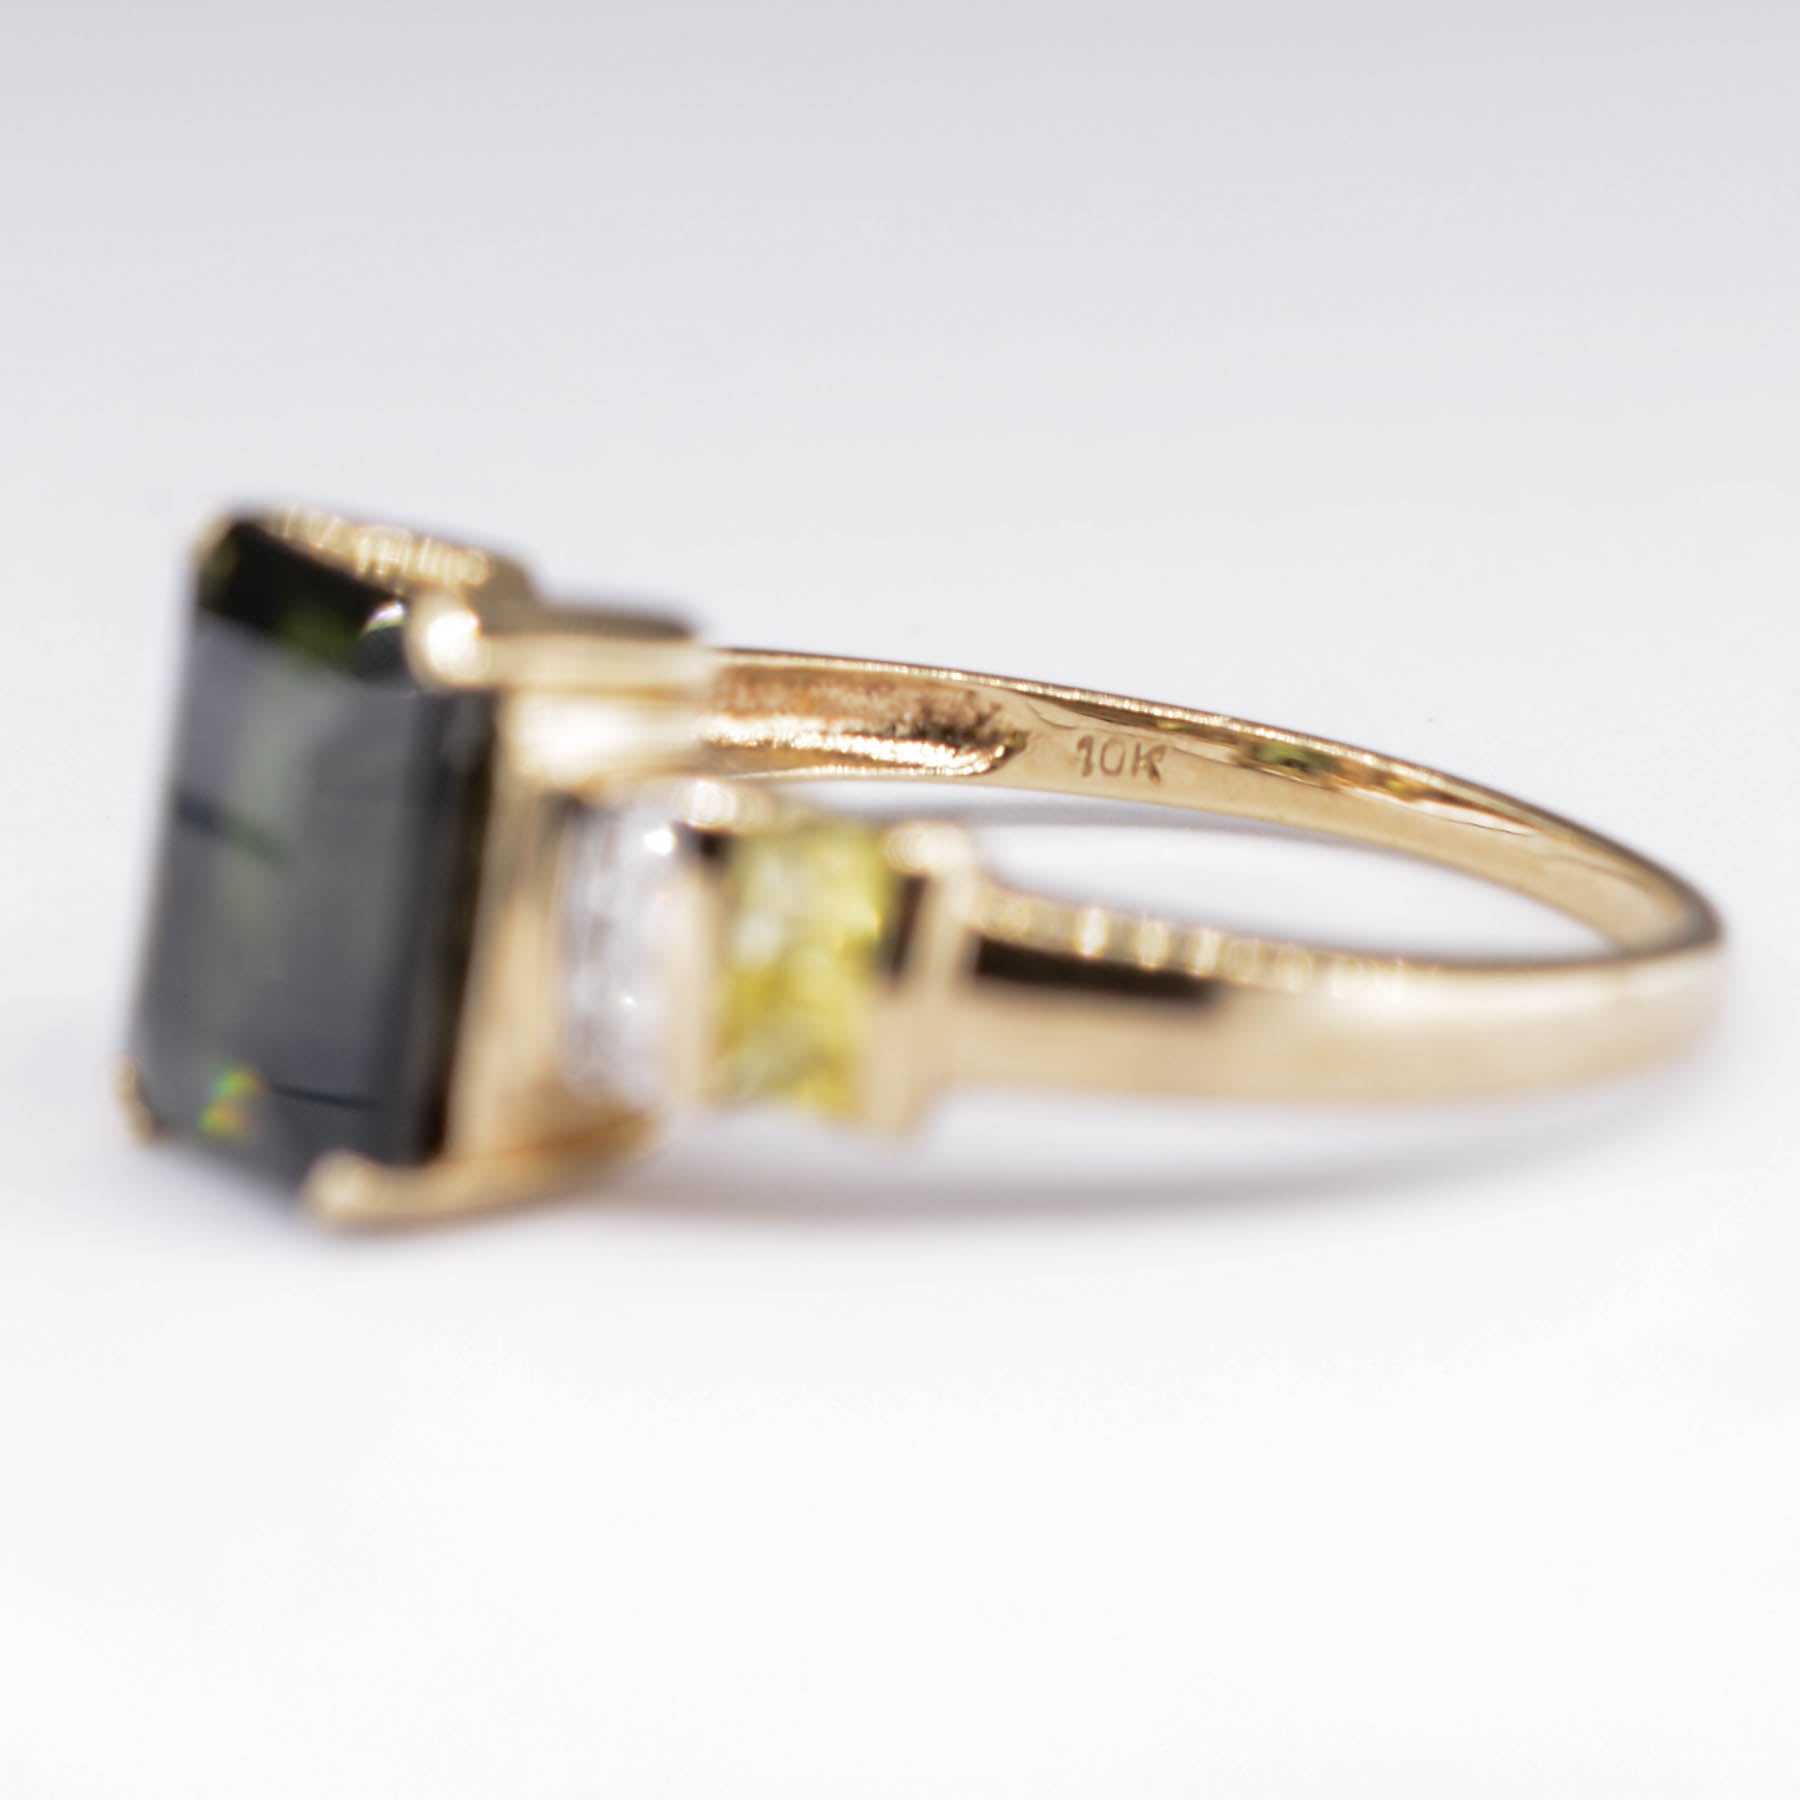 Green Tourmaline Ring with Sapphire and DIamond Accents | 2.89ctw | SZ 7.75 |